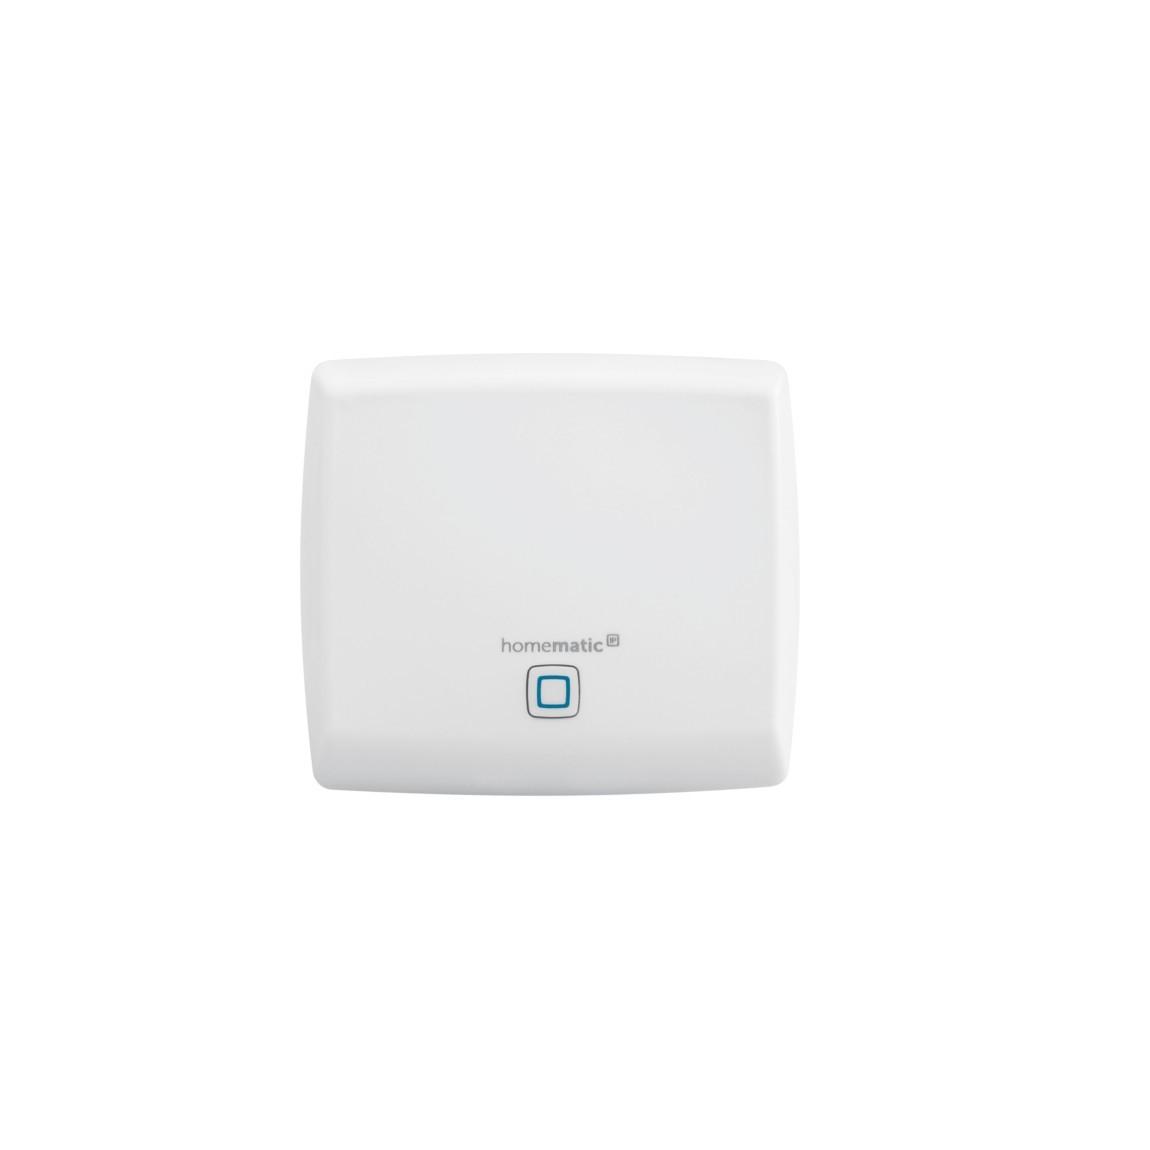 Homematic IP Access Point frontal